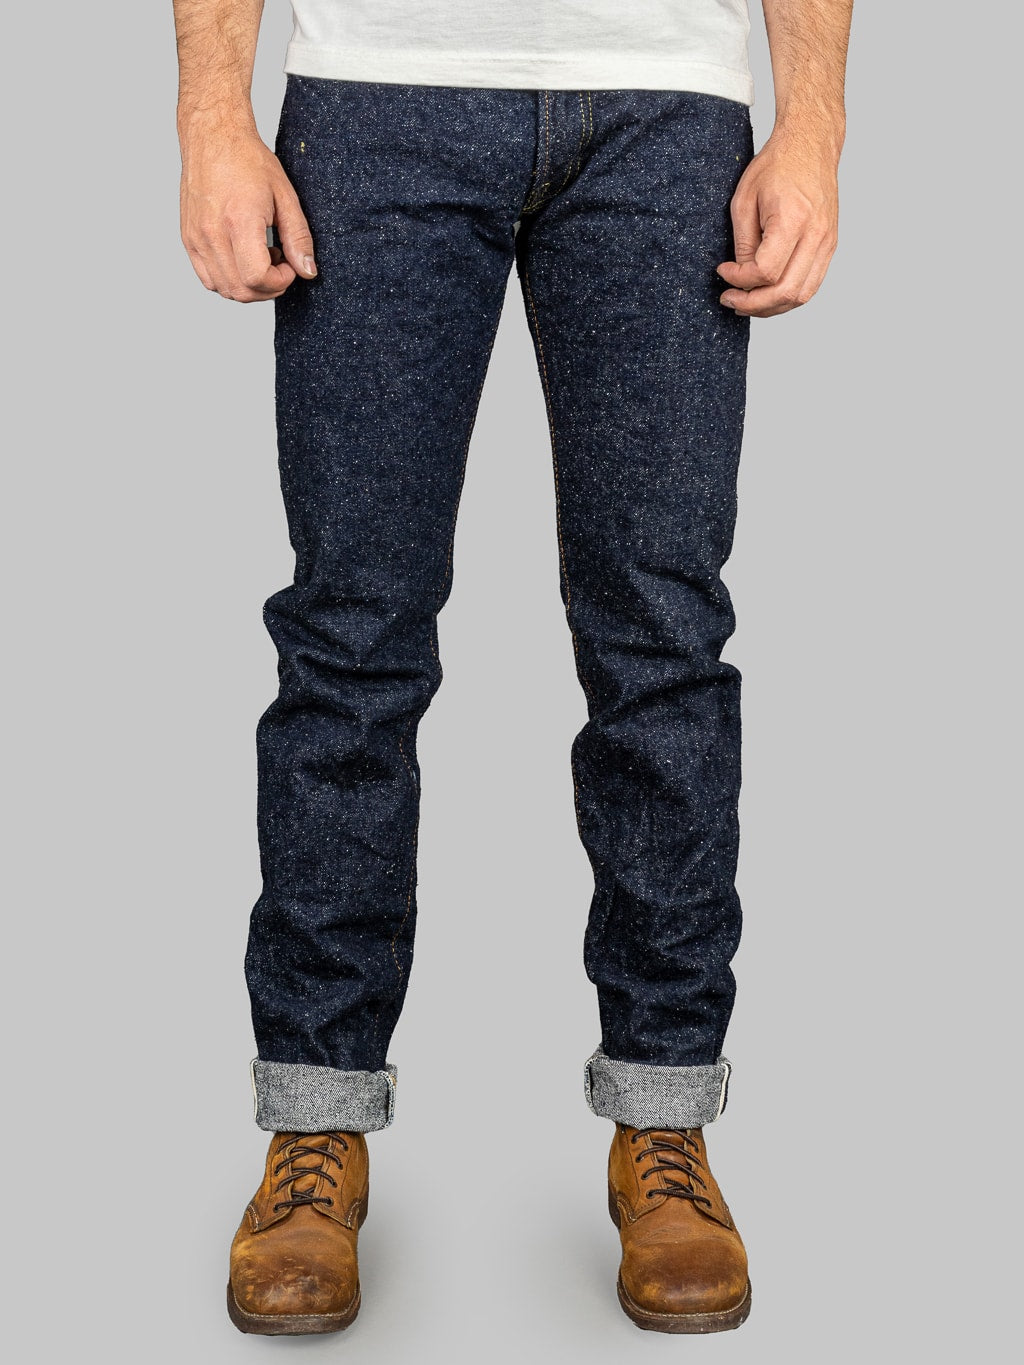 The Strike Gold Keep Earth Natural Indigo Jeans front fit